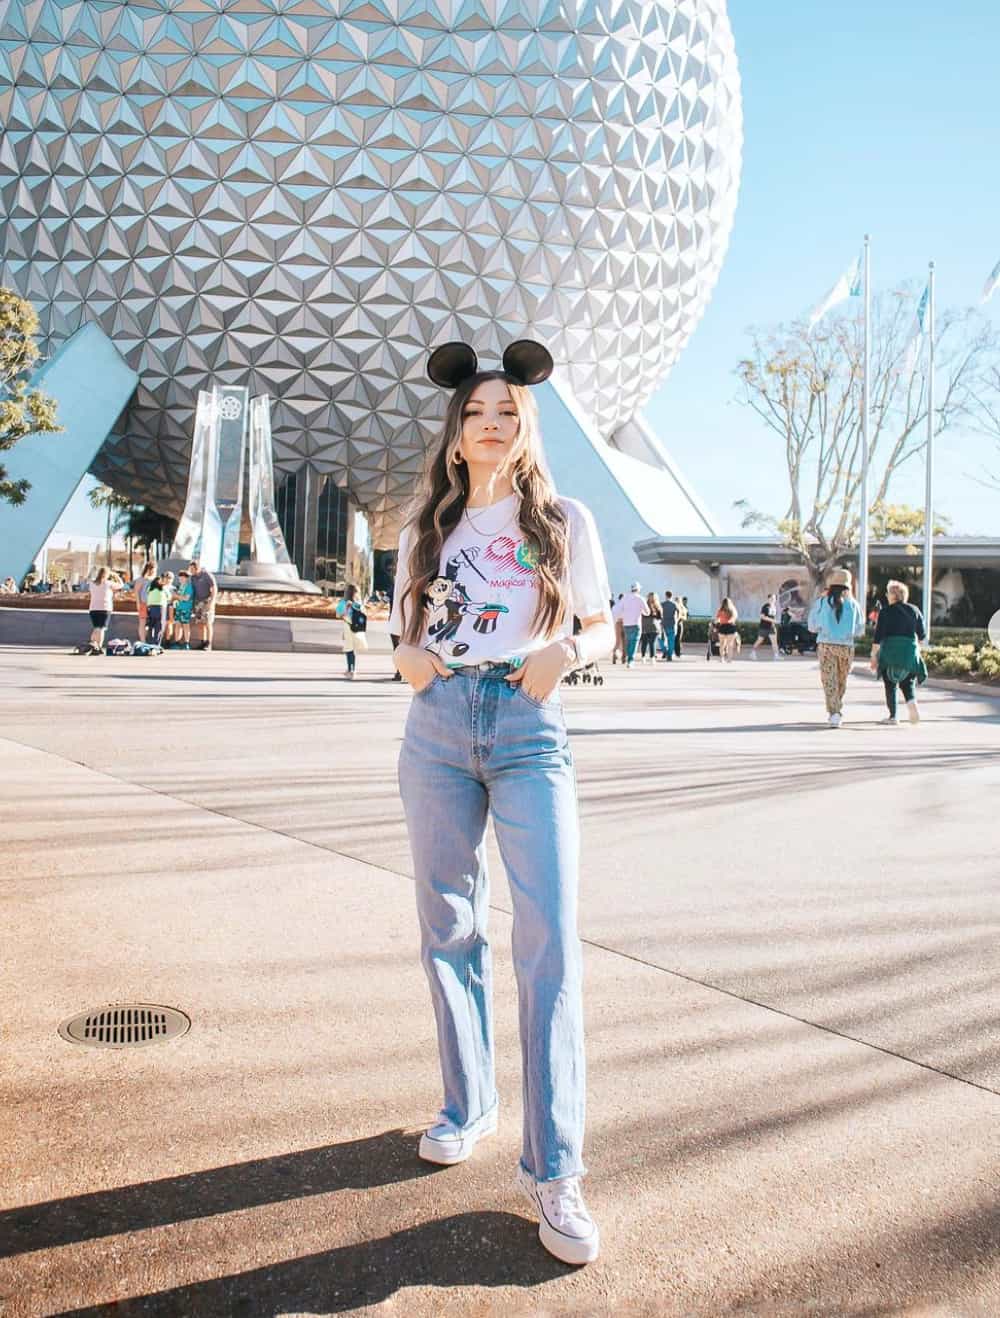 Woman at Disney World wearing an outfit with blue jeans and a Mickey t-shirt with sneakers and Mickey Mouse ears